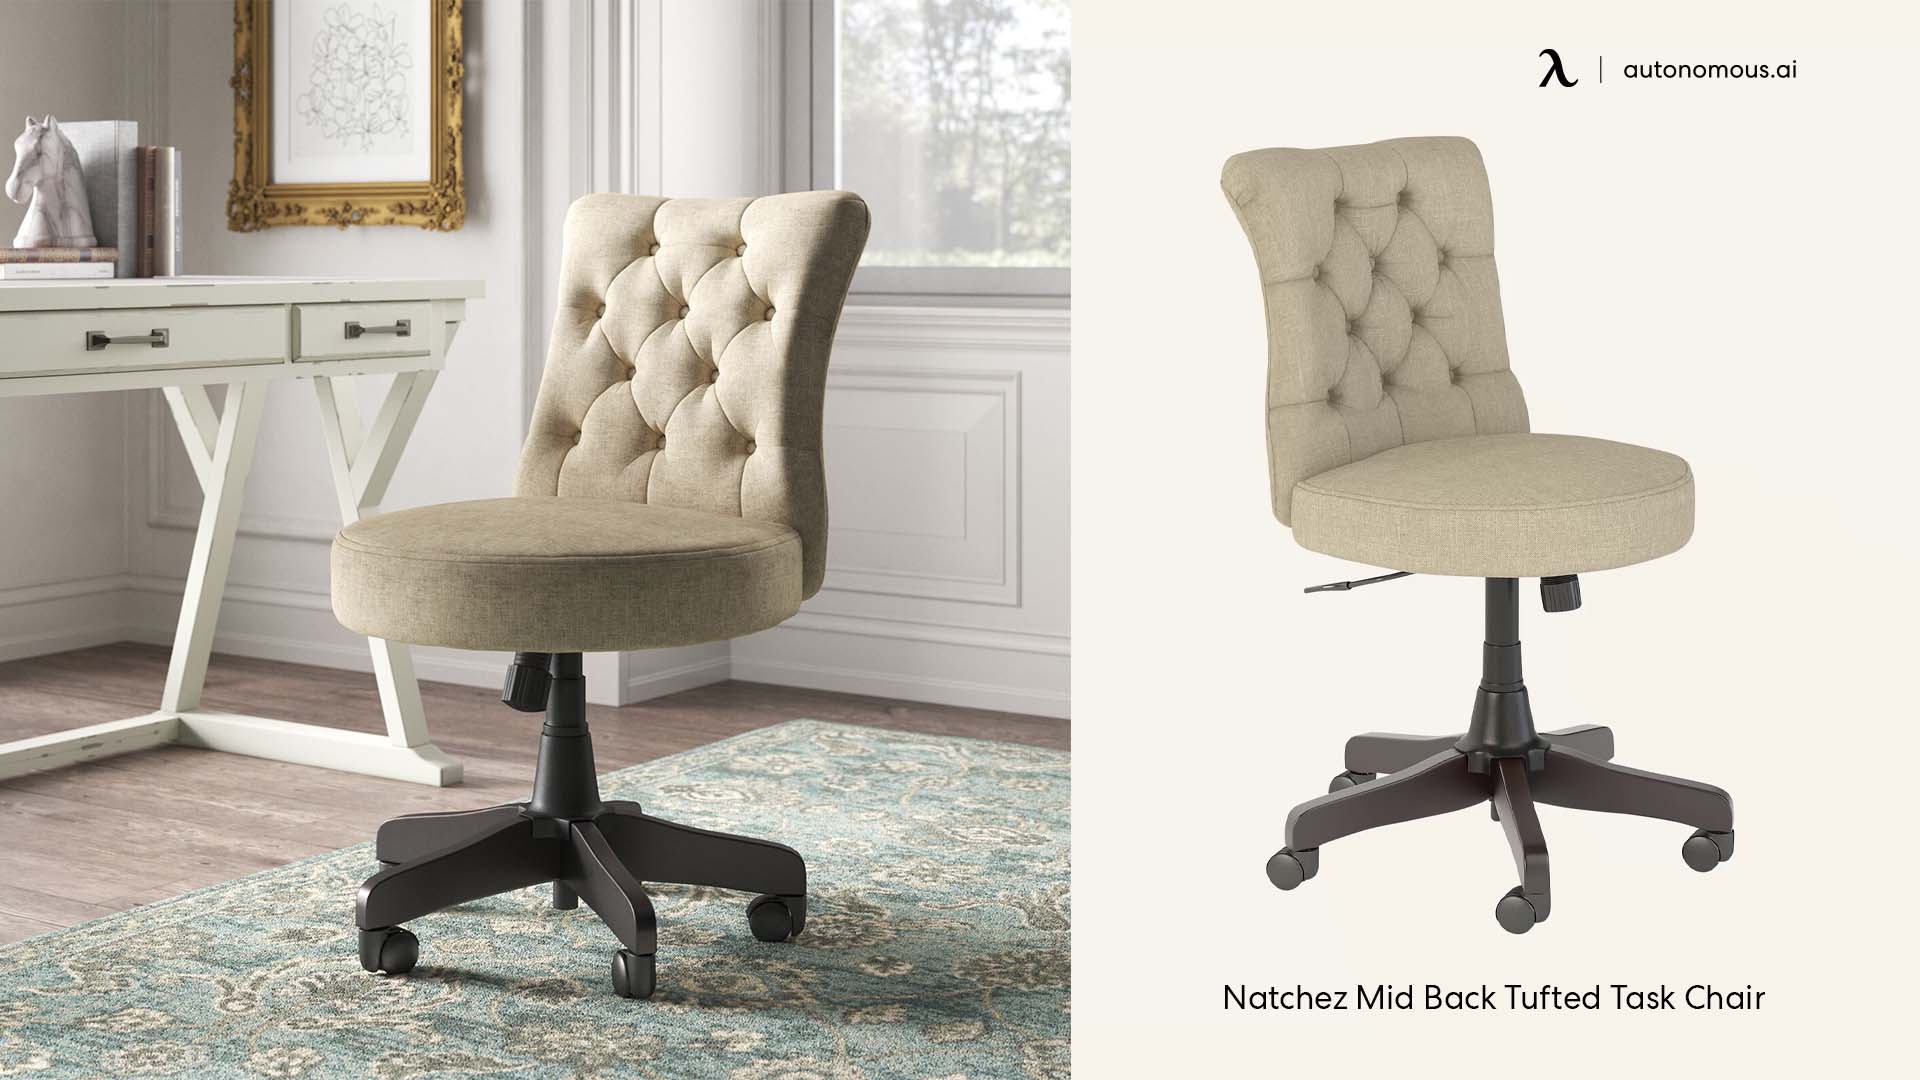 Natchez Mid Back Tufted Task Chair